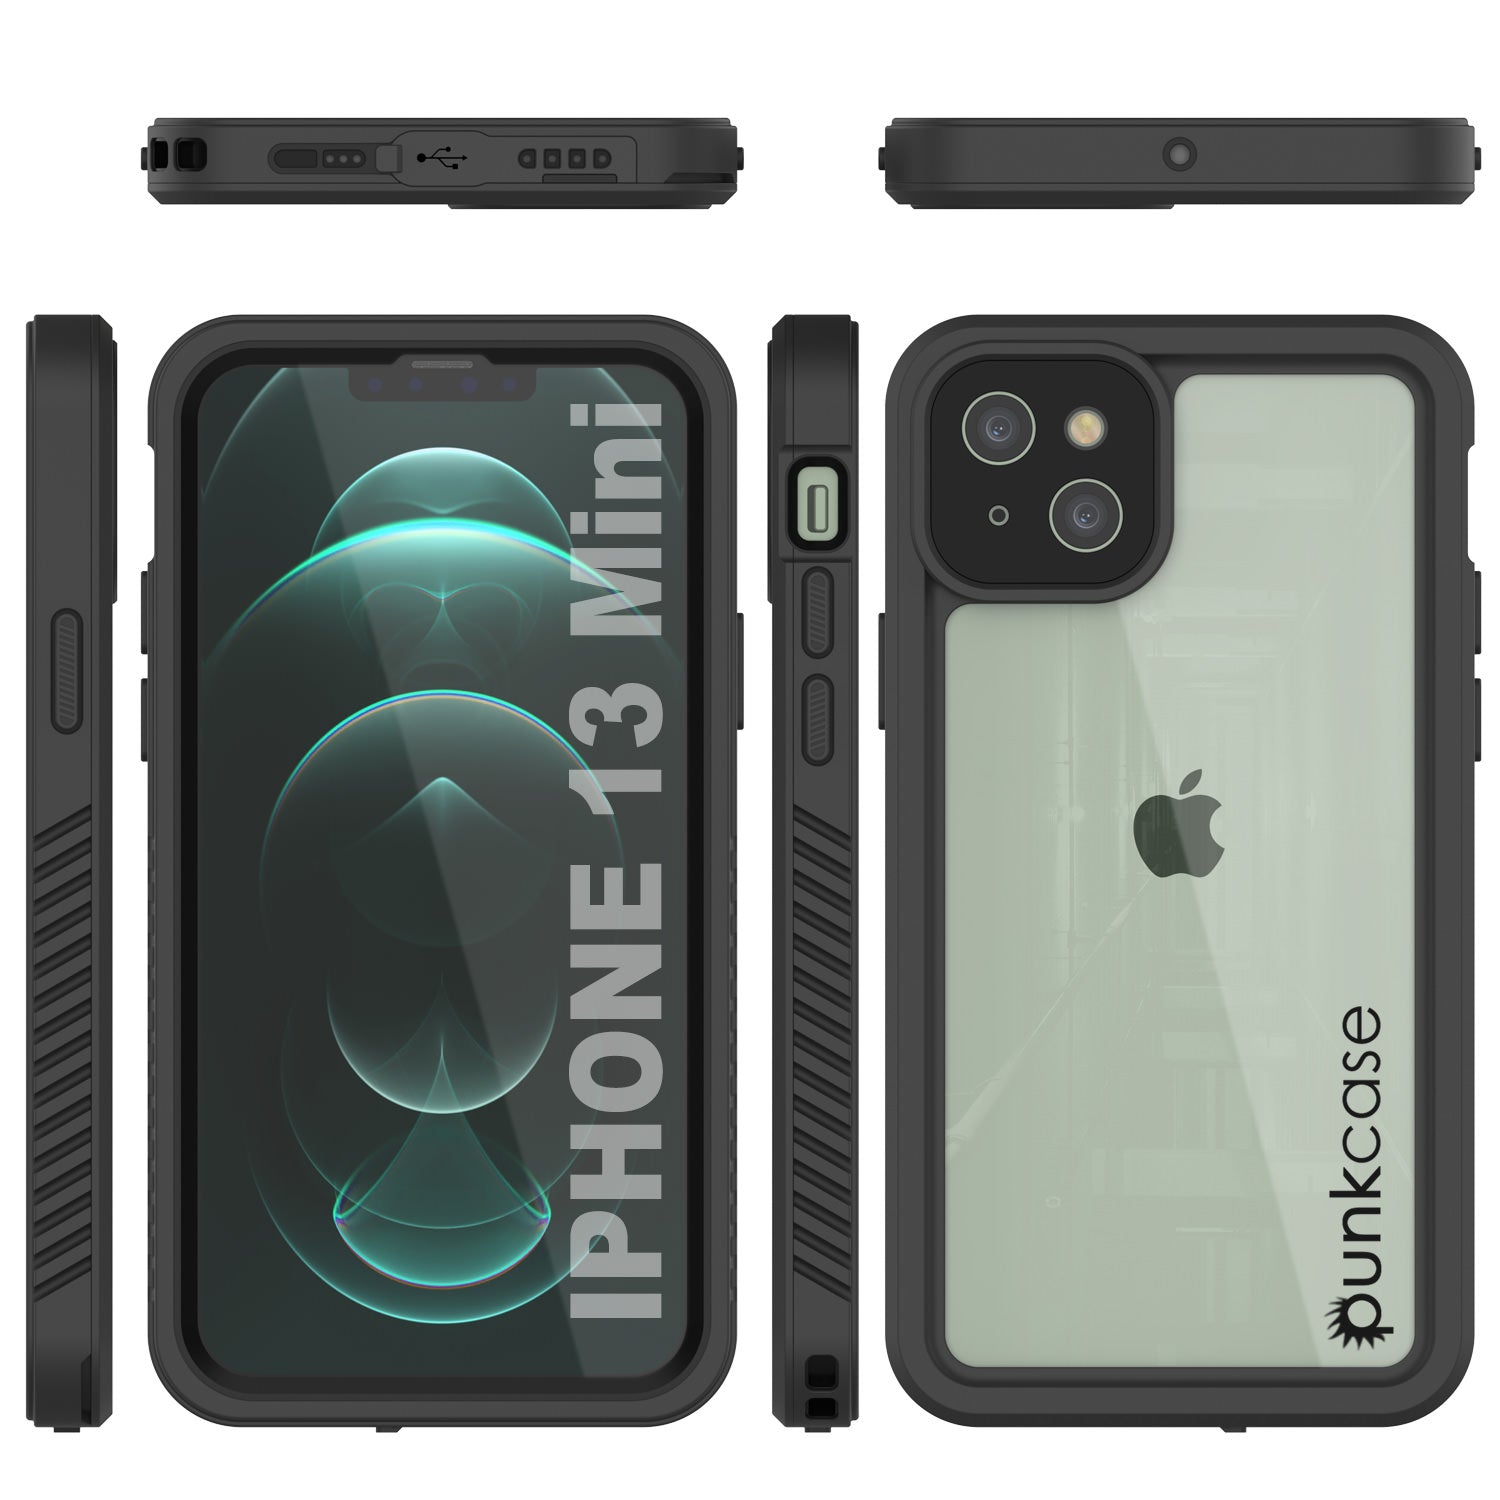 iPhone 13 Mini  Waterproof Case, Punkcase [Extreme Series] Armor Cover W/ Built In Screen Protector [Black]